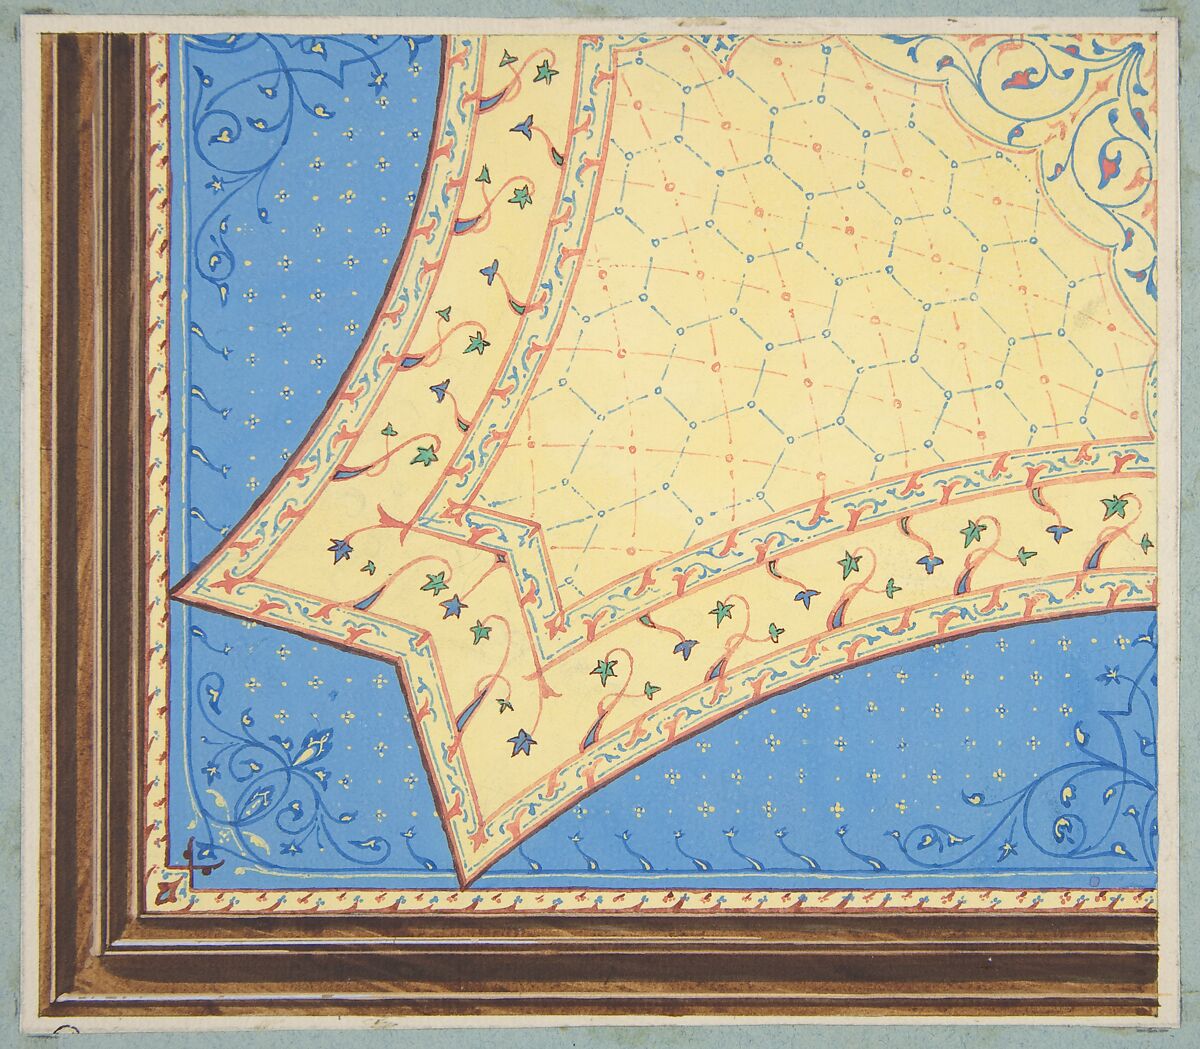 Design for the painted decoration of a ceiling, Jules-Edmond-Charles Lachaise (French, died 1897), watercolor and gouache on laid paper 